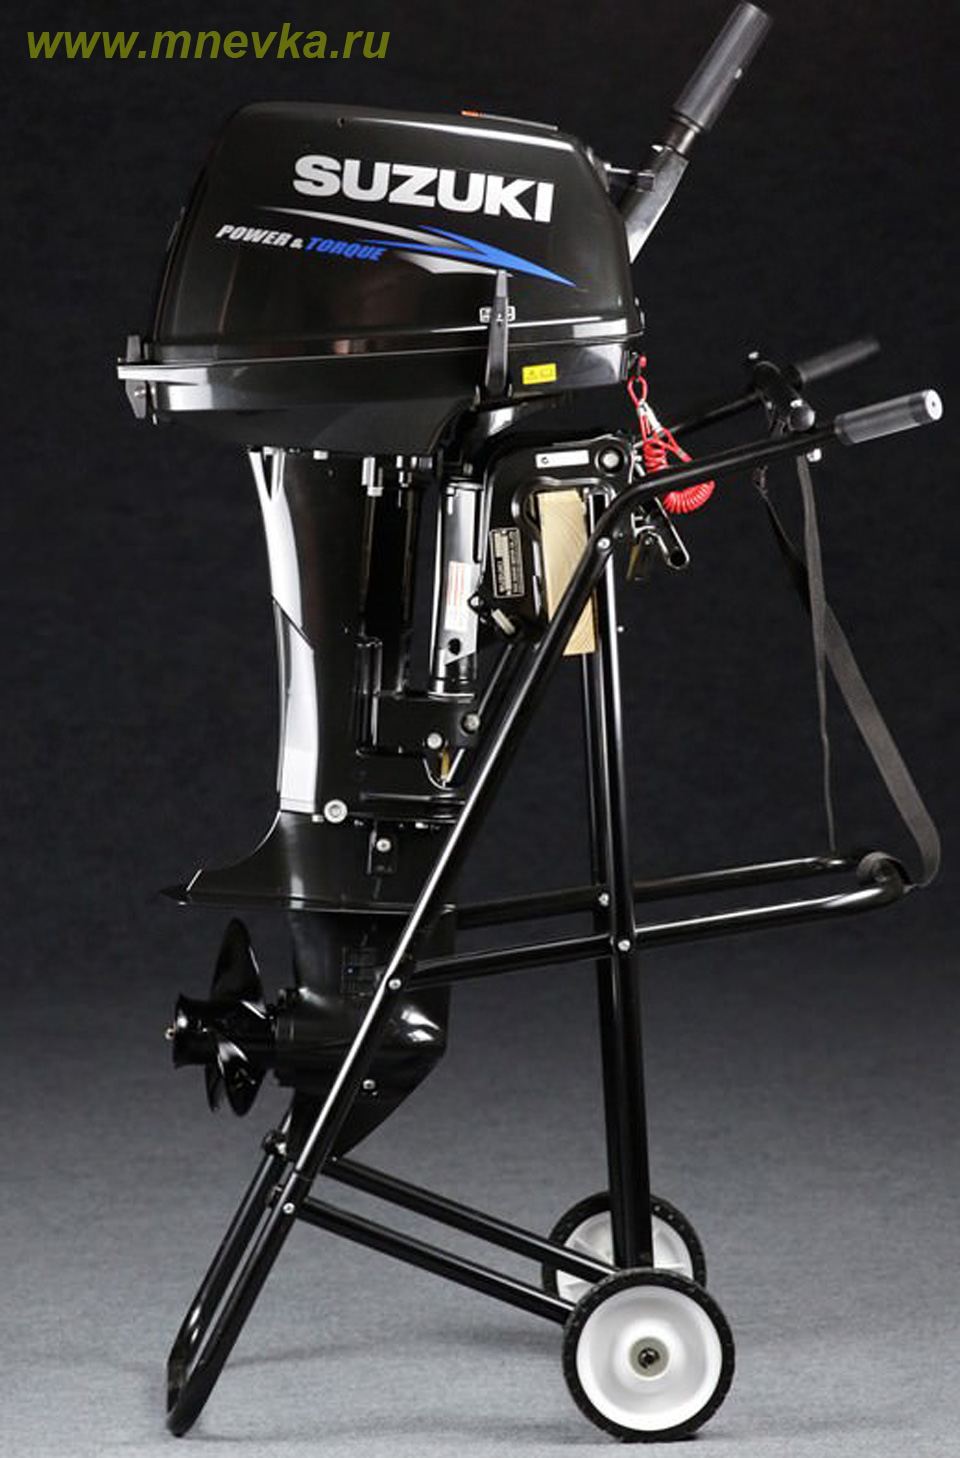 http://www.mnevka.ru/outboard/photo2/small-cart-for-suzuki-dt9-a.jpg